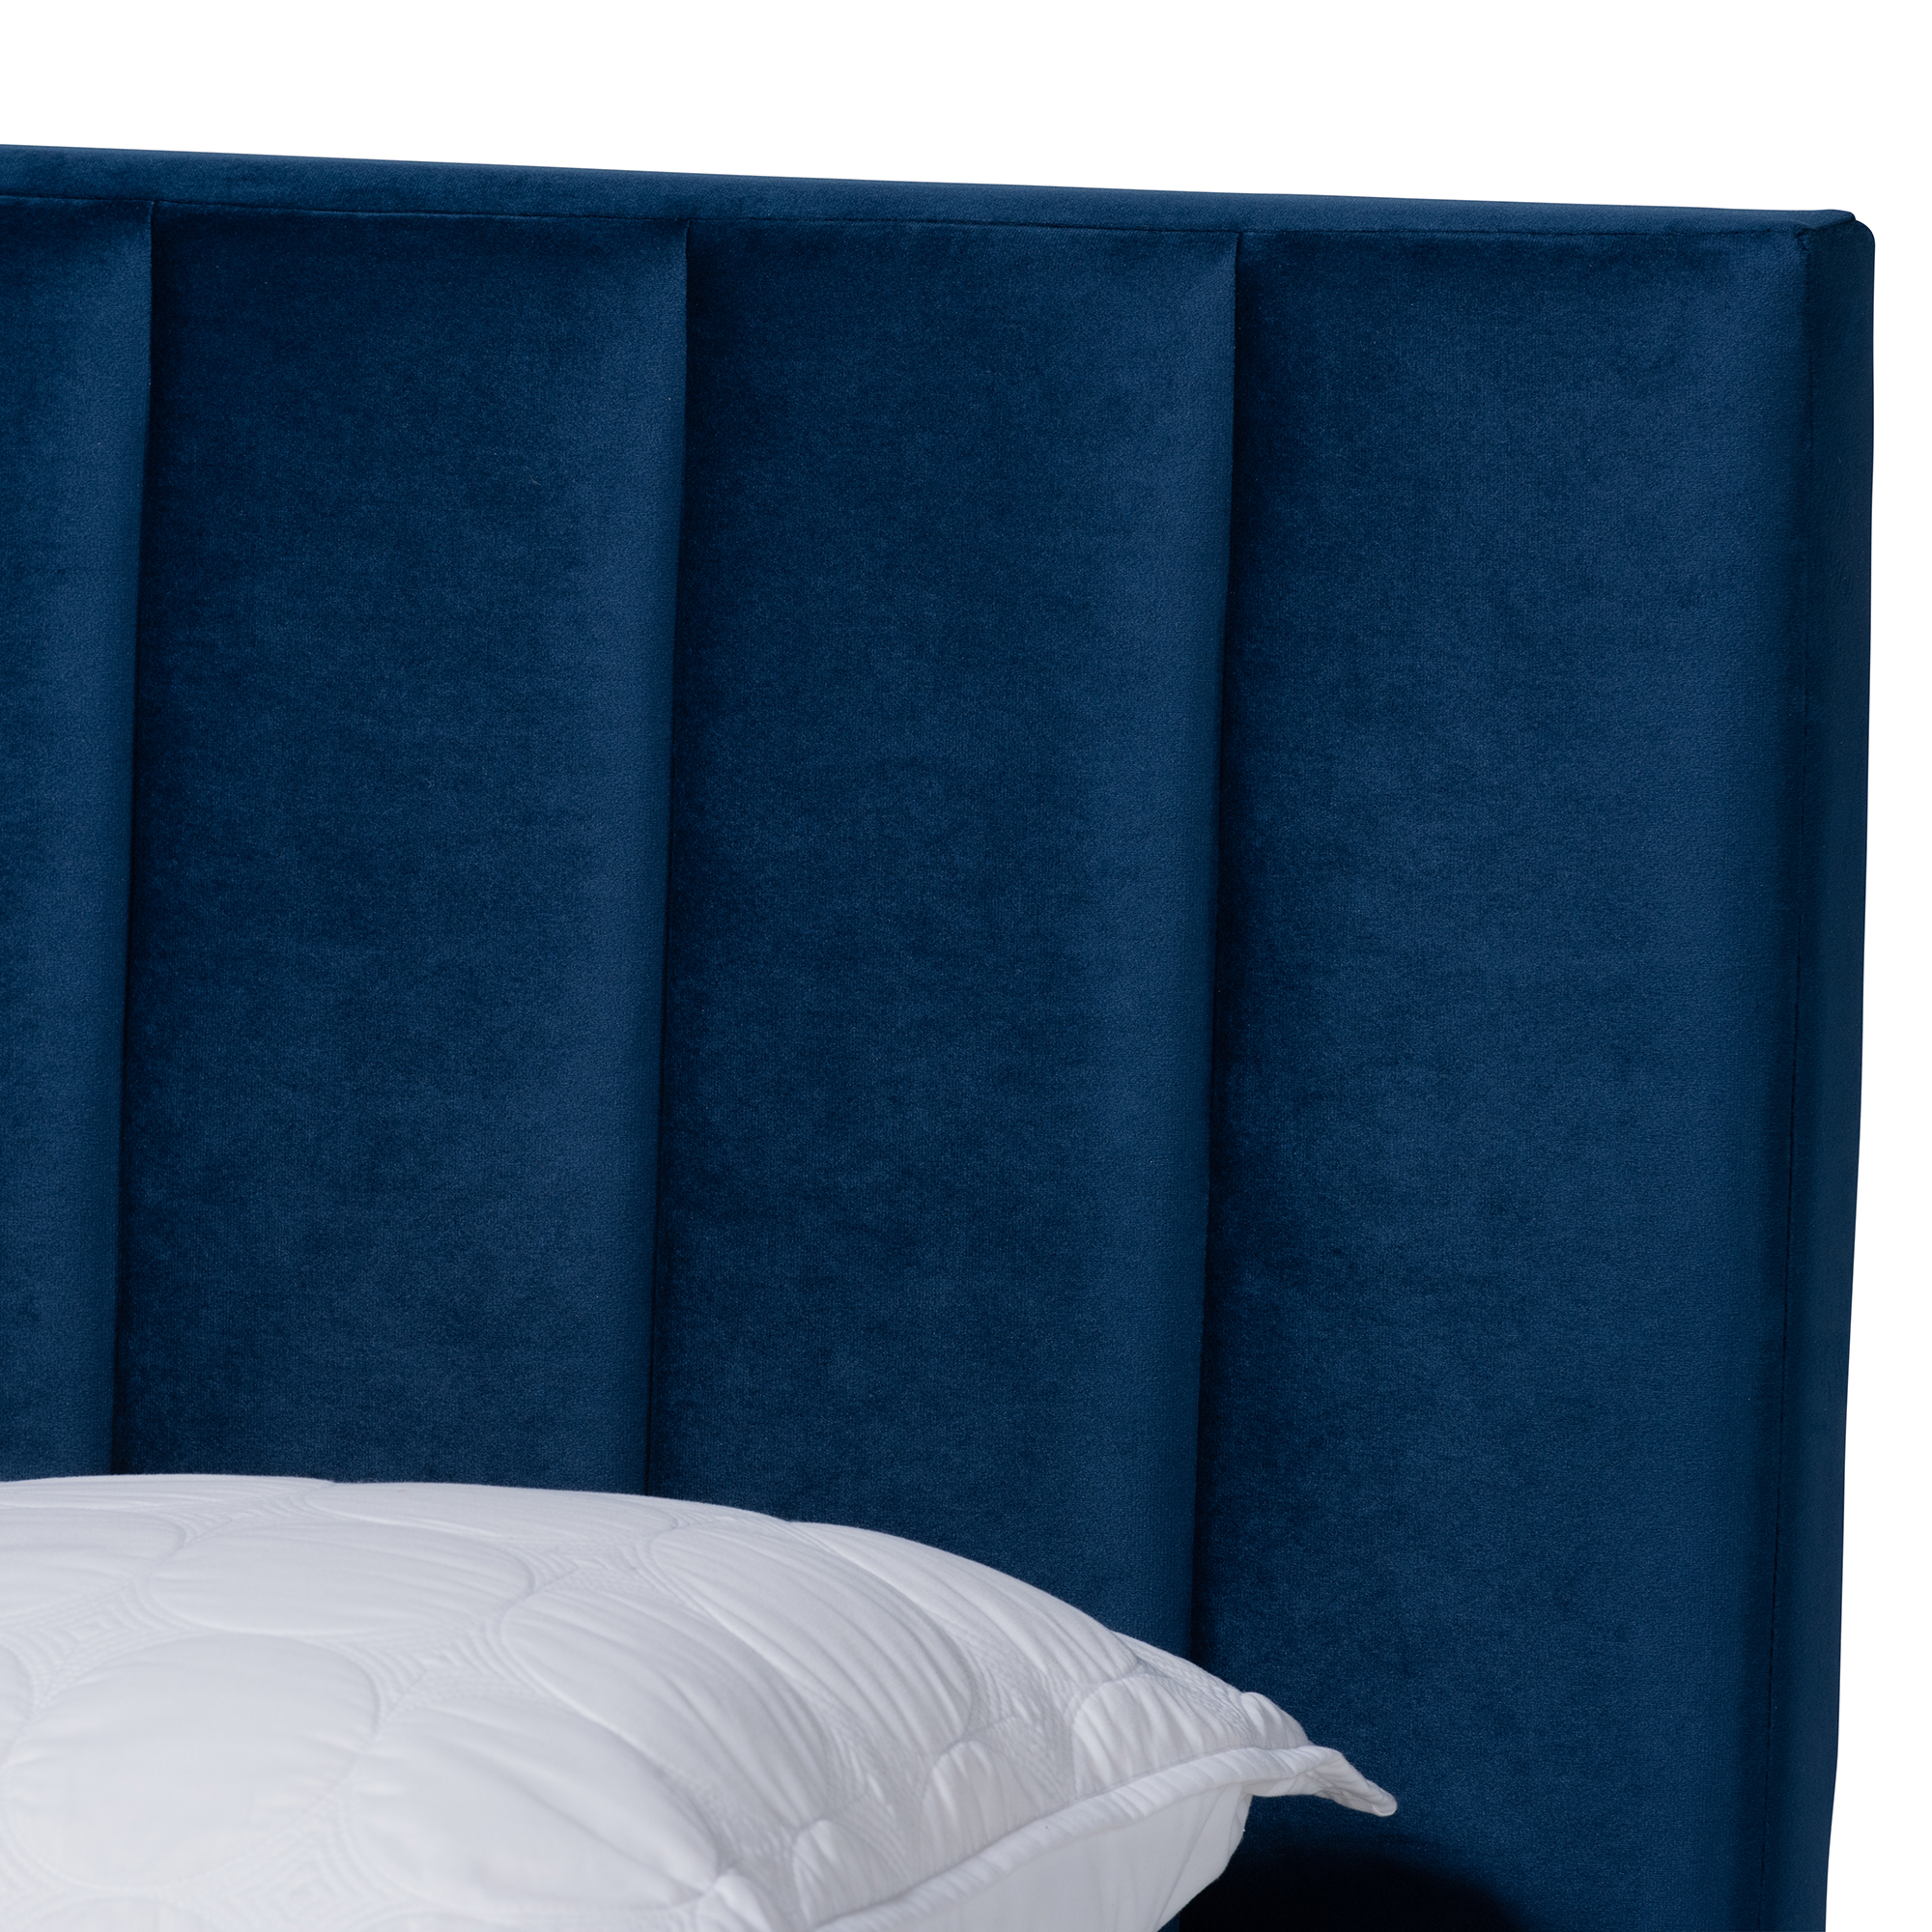 Skyline Decor Navy Blue Velvet Fabric Upholstered Full Size Panel Bed with Channel Tufted Headboard - image 5 of 5